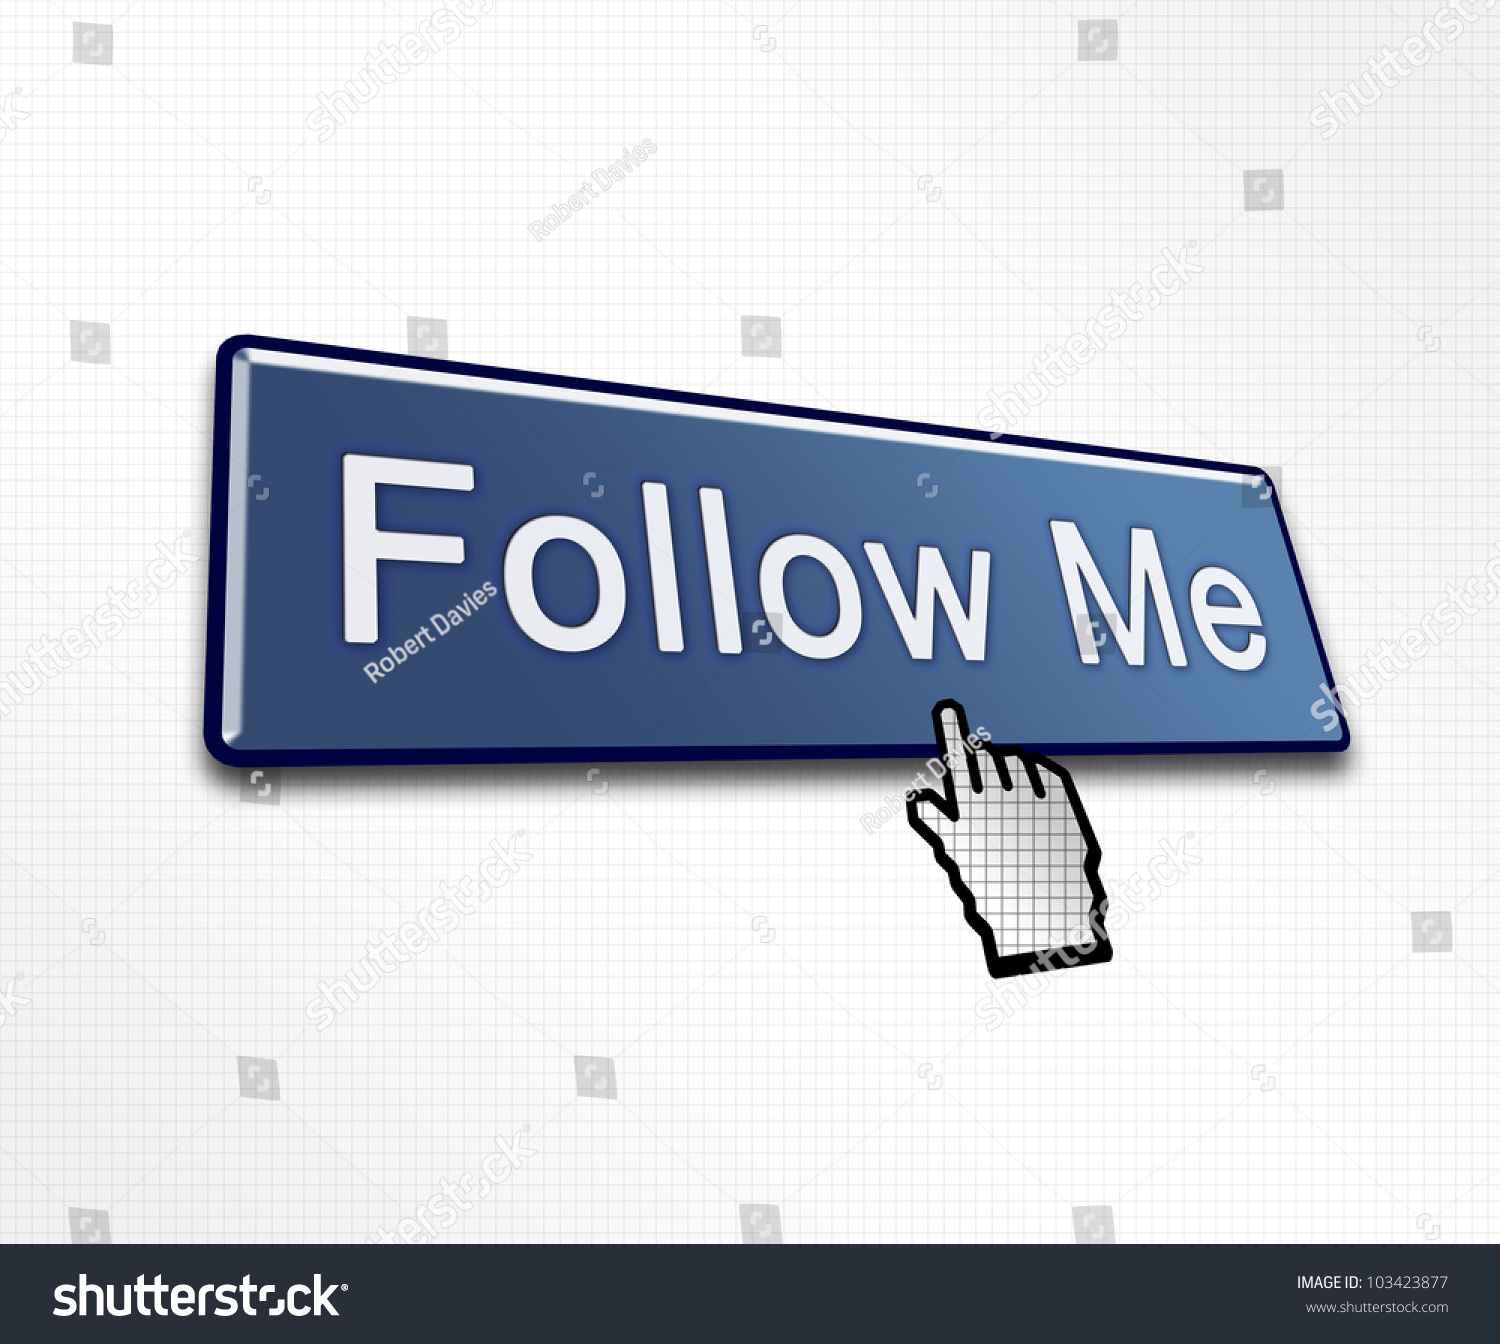 Clicked Follow Me Button Illustration For Social Media - 103423877 ...